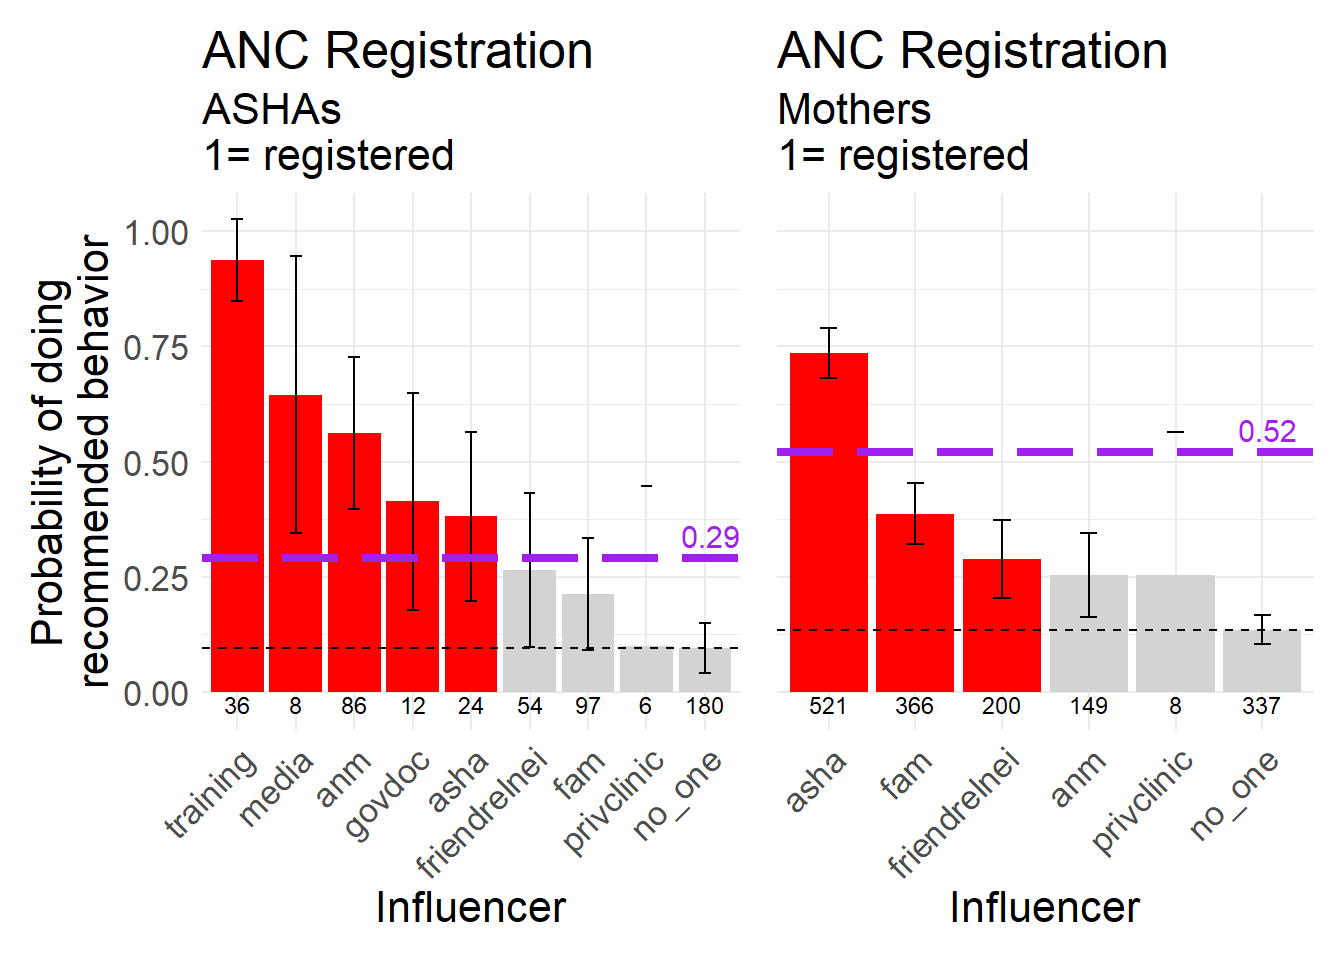 Timely ANC Registration, a biomedically recommended behavior, 1 = registered within the first trimester